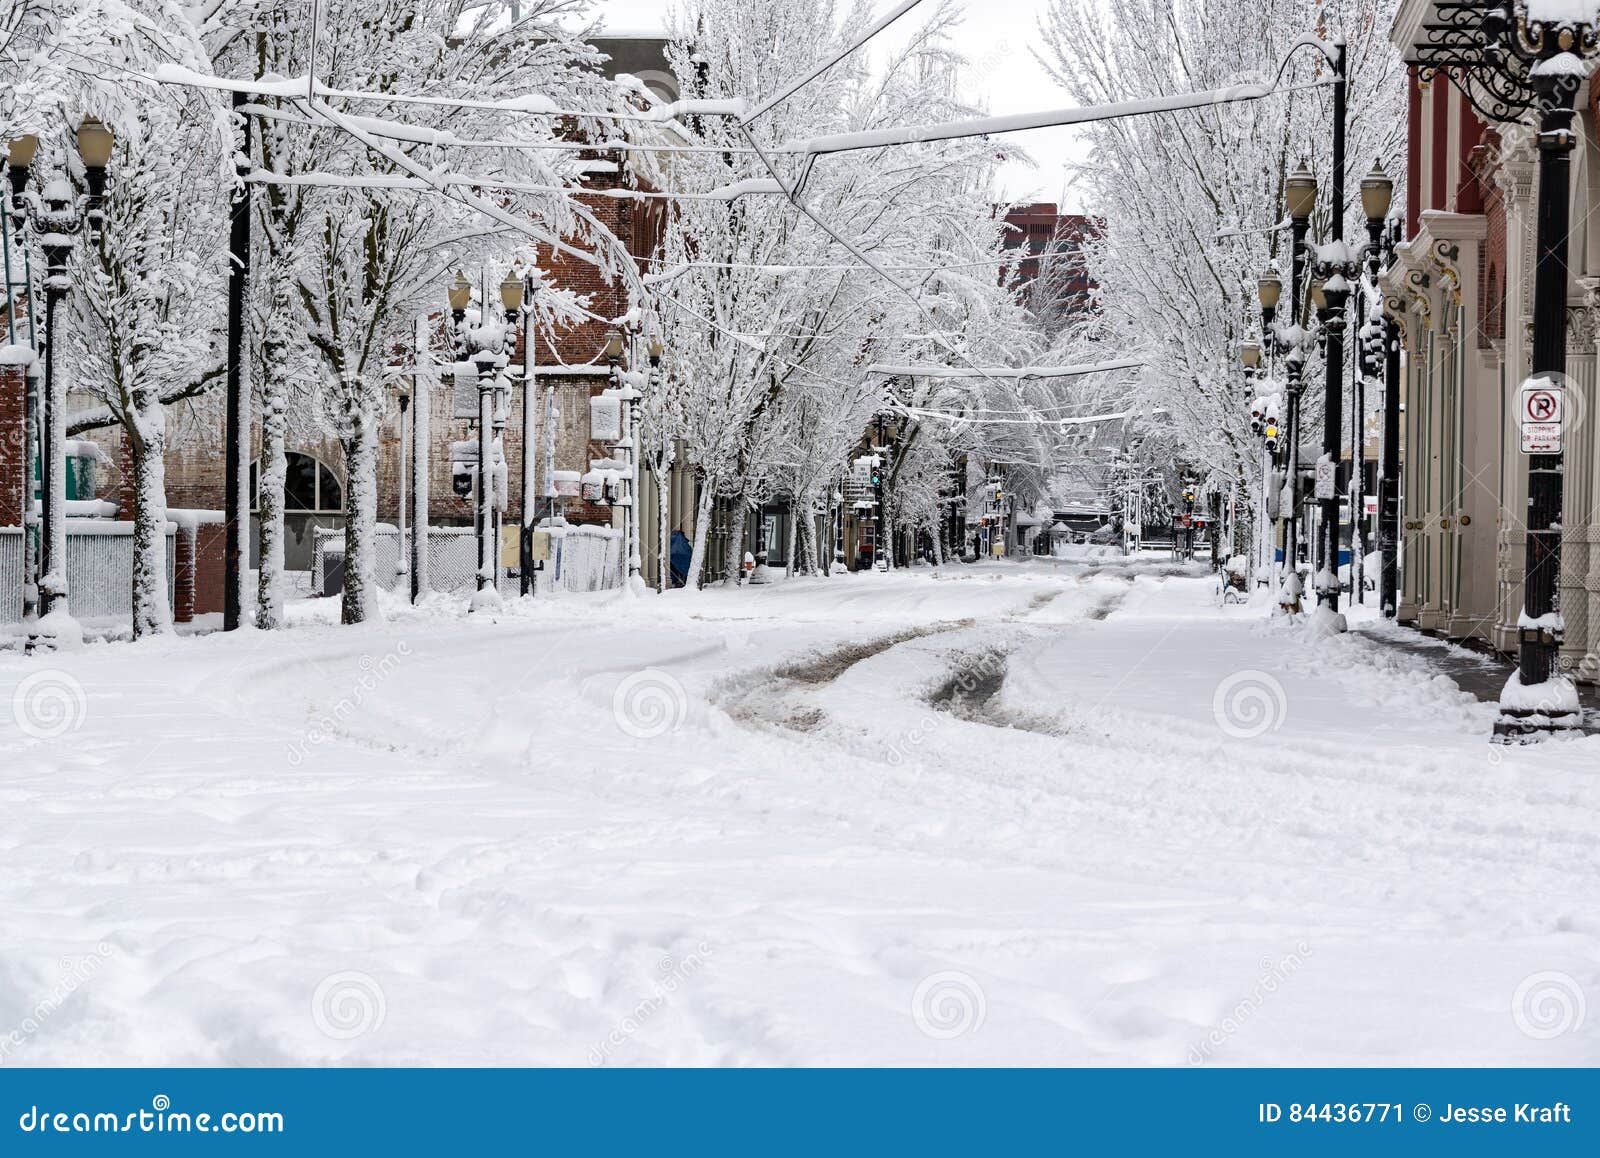 Downtown Portland Under Snow Stock Image - Image of grey, downtown ...